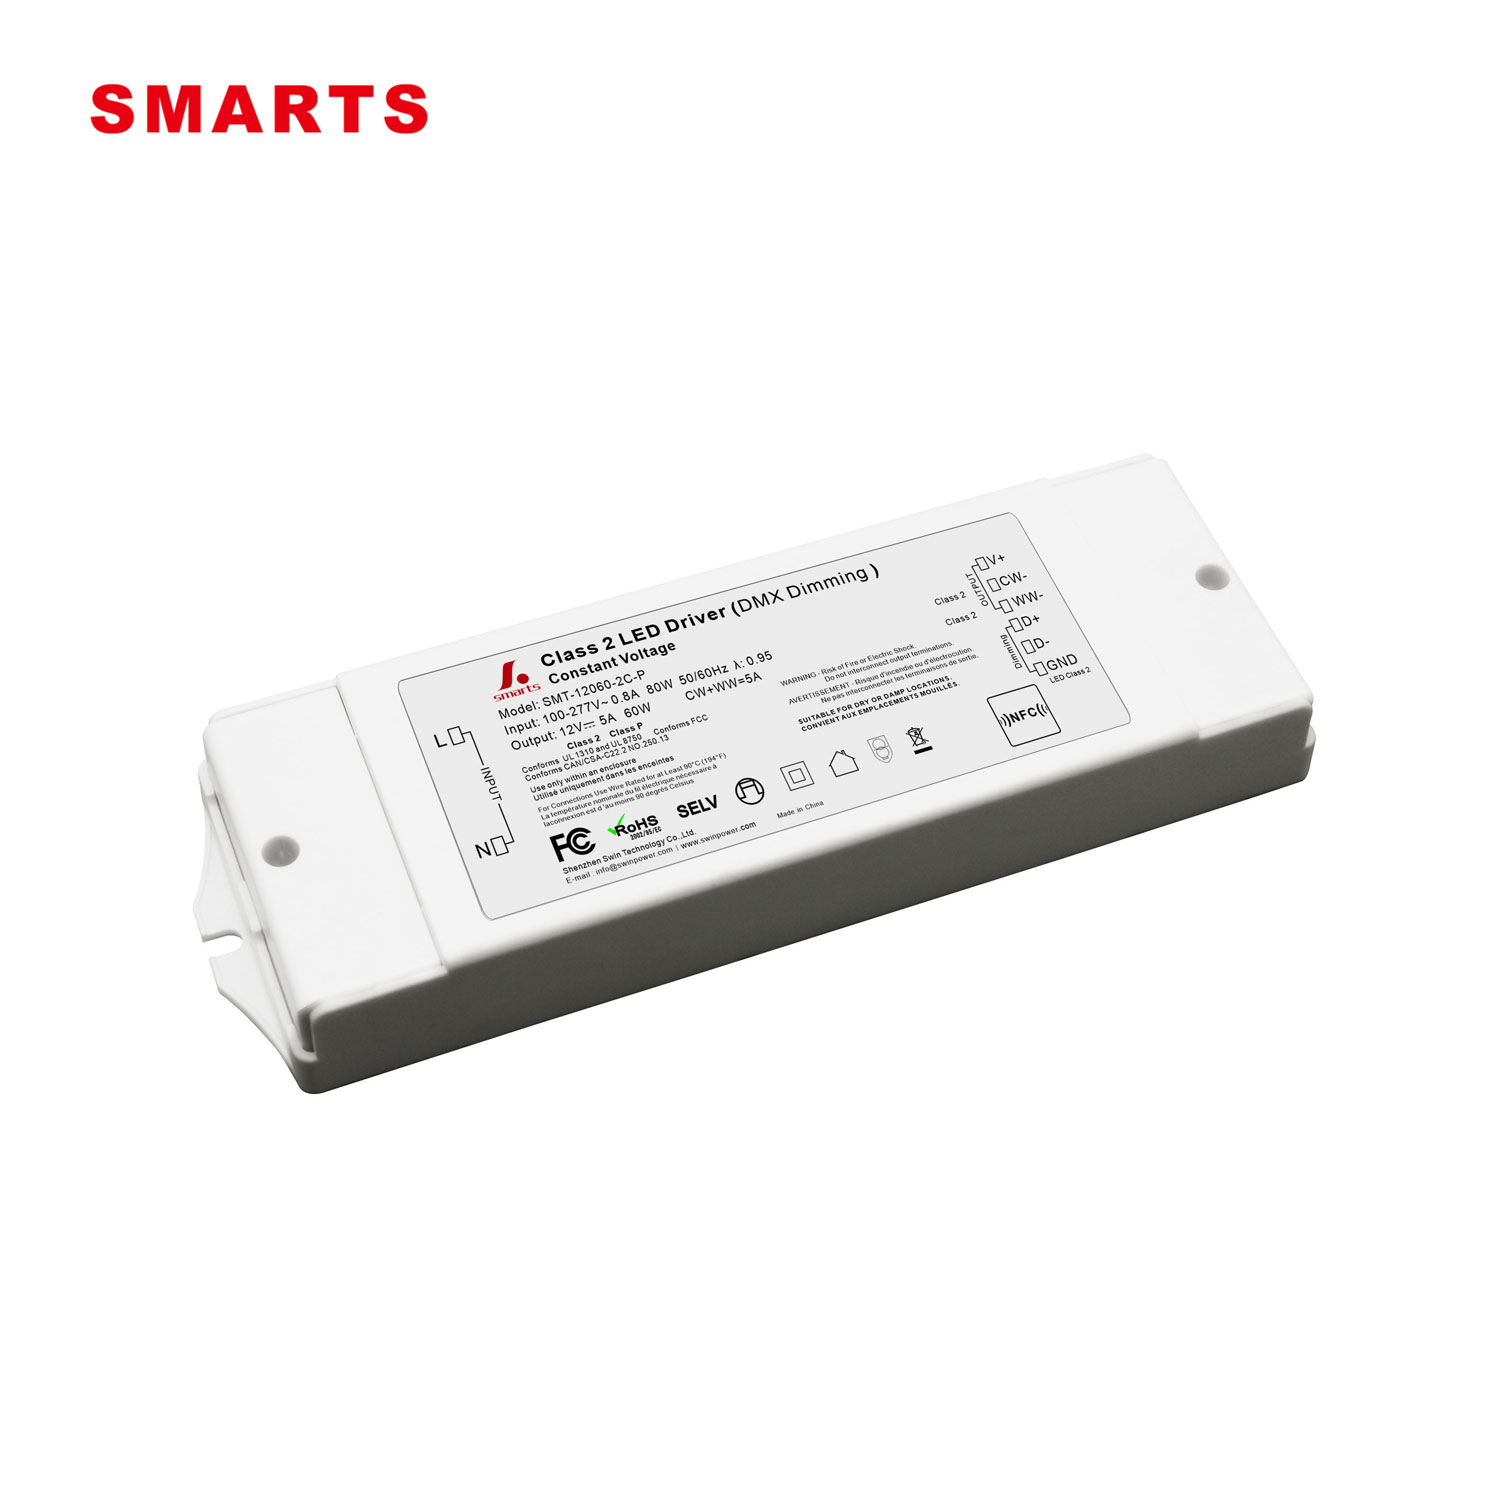 60w DMX512 Dimmable LED Driver